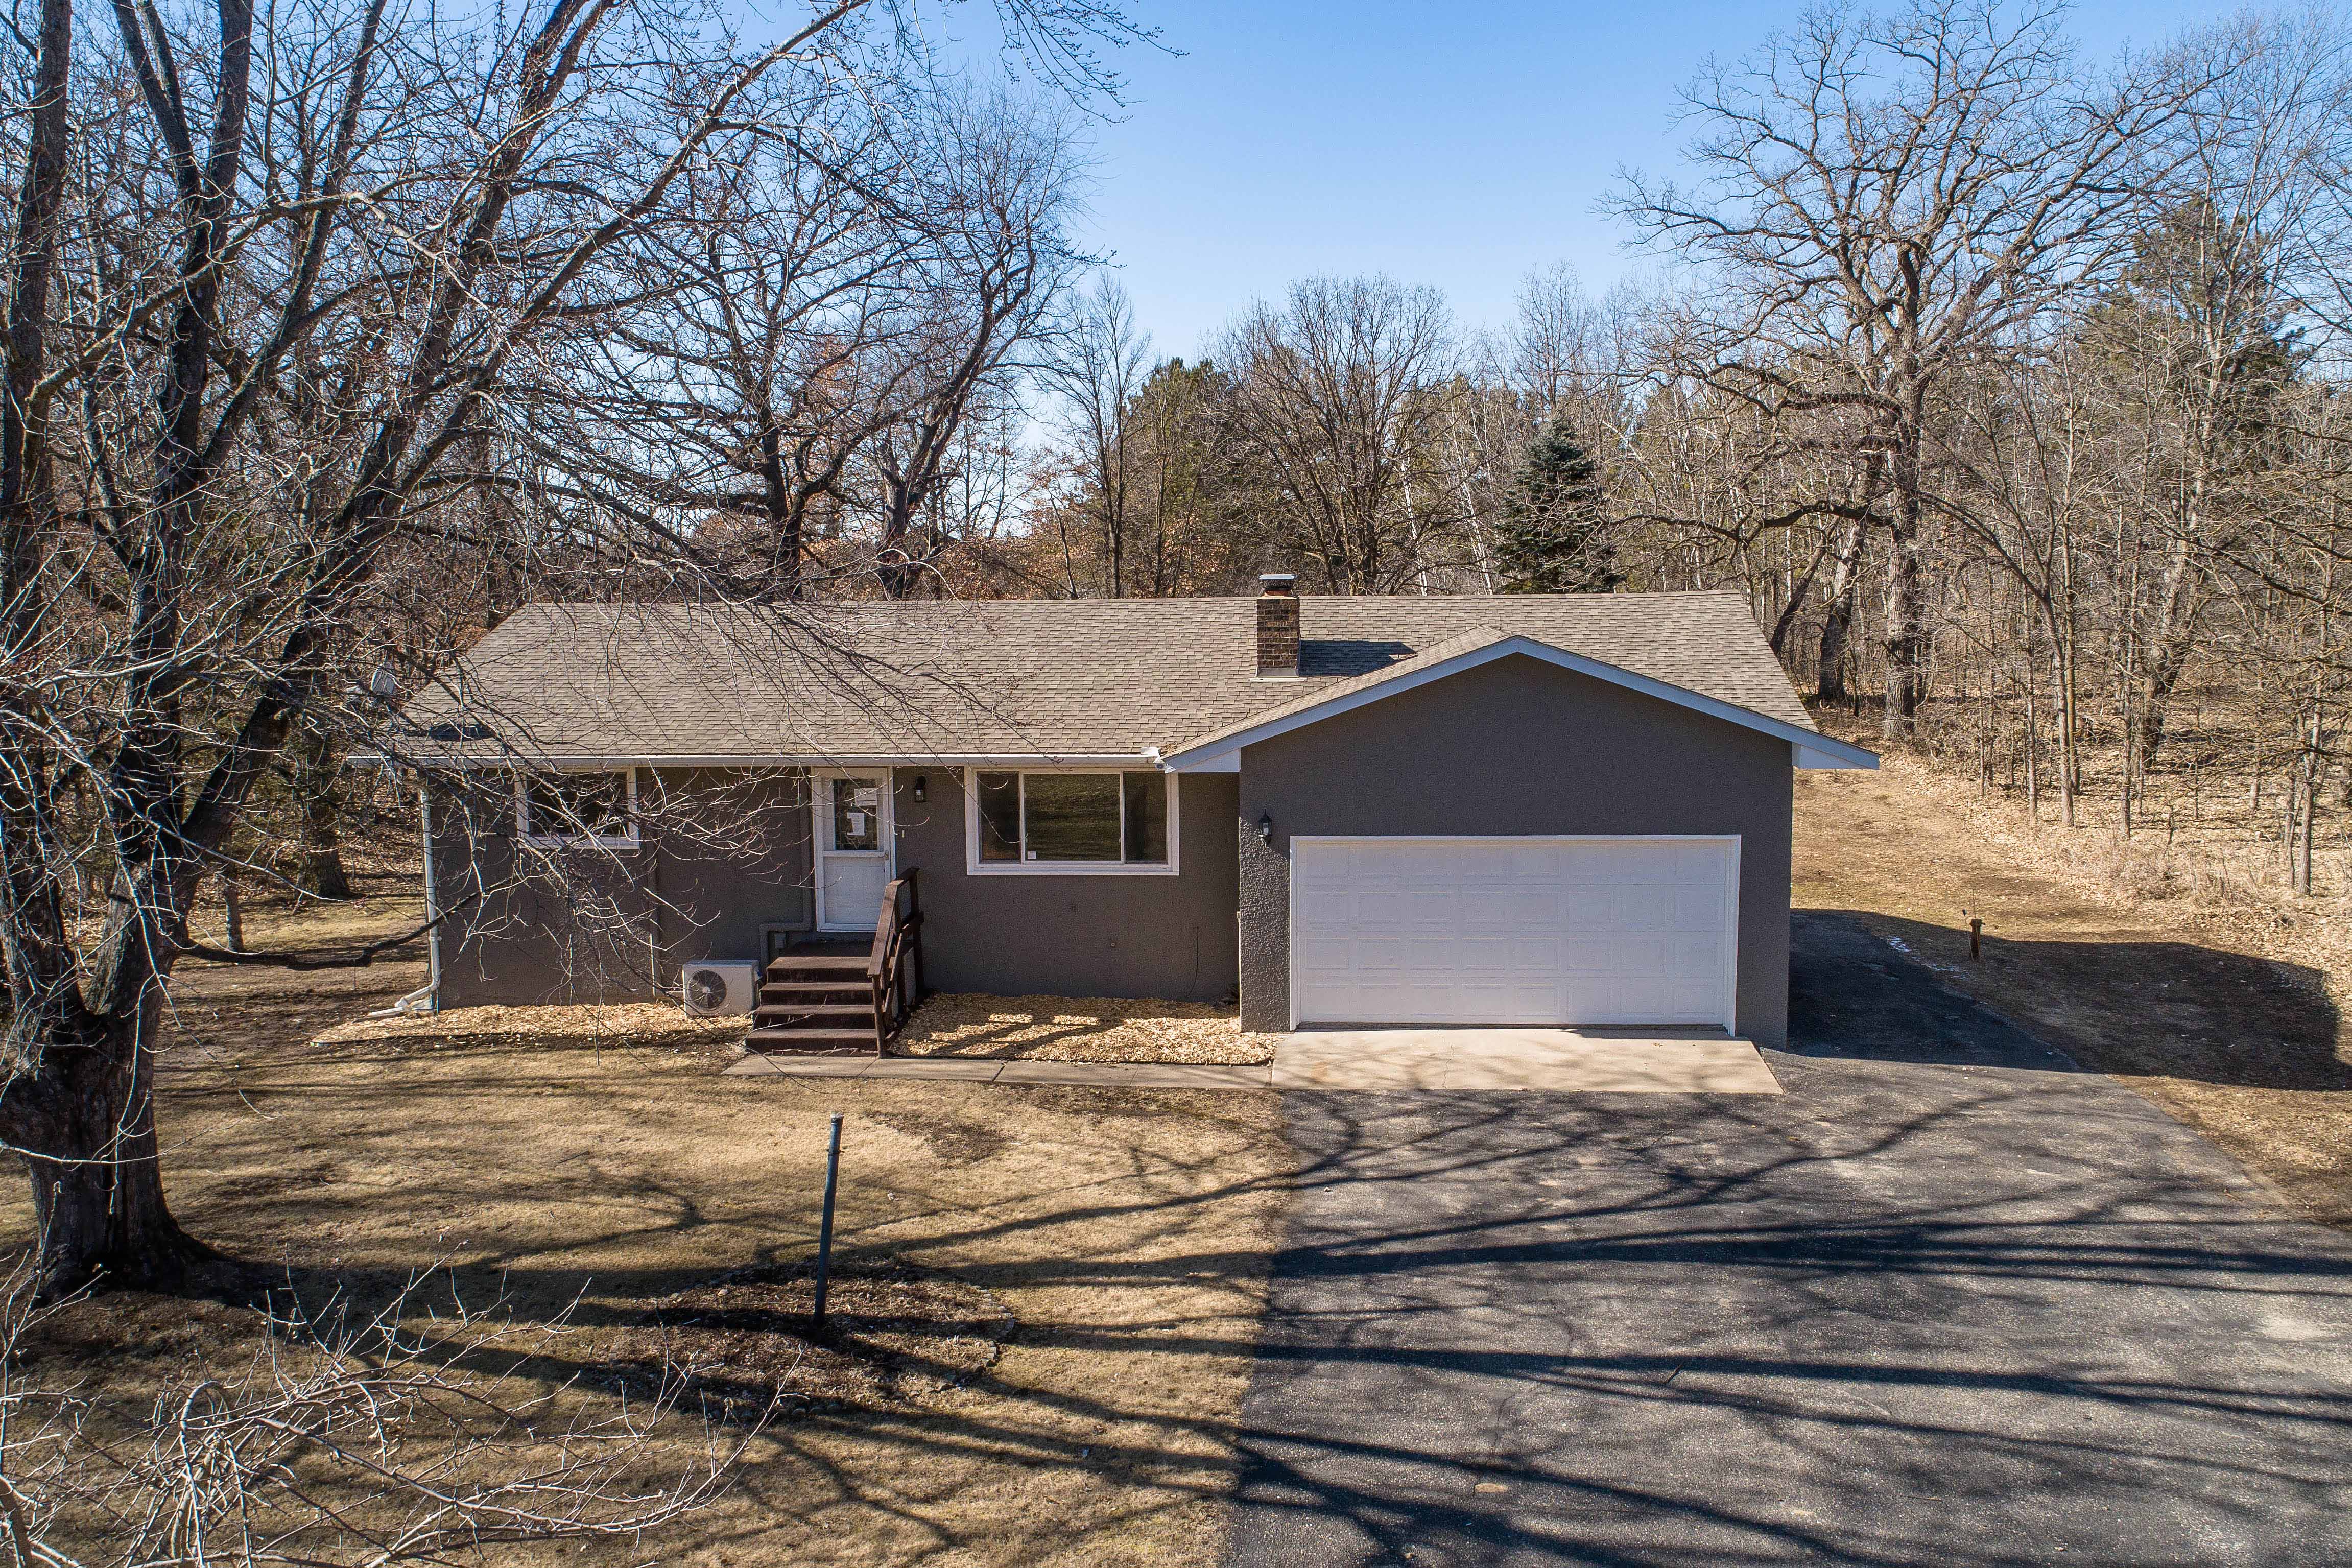 Paradise Dr, Browerville, MN 56438 #1